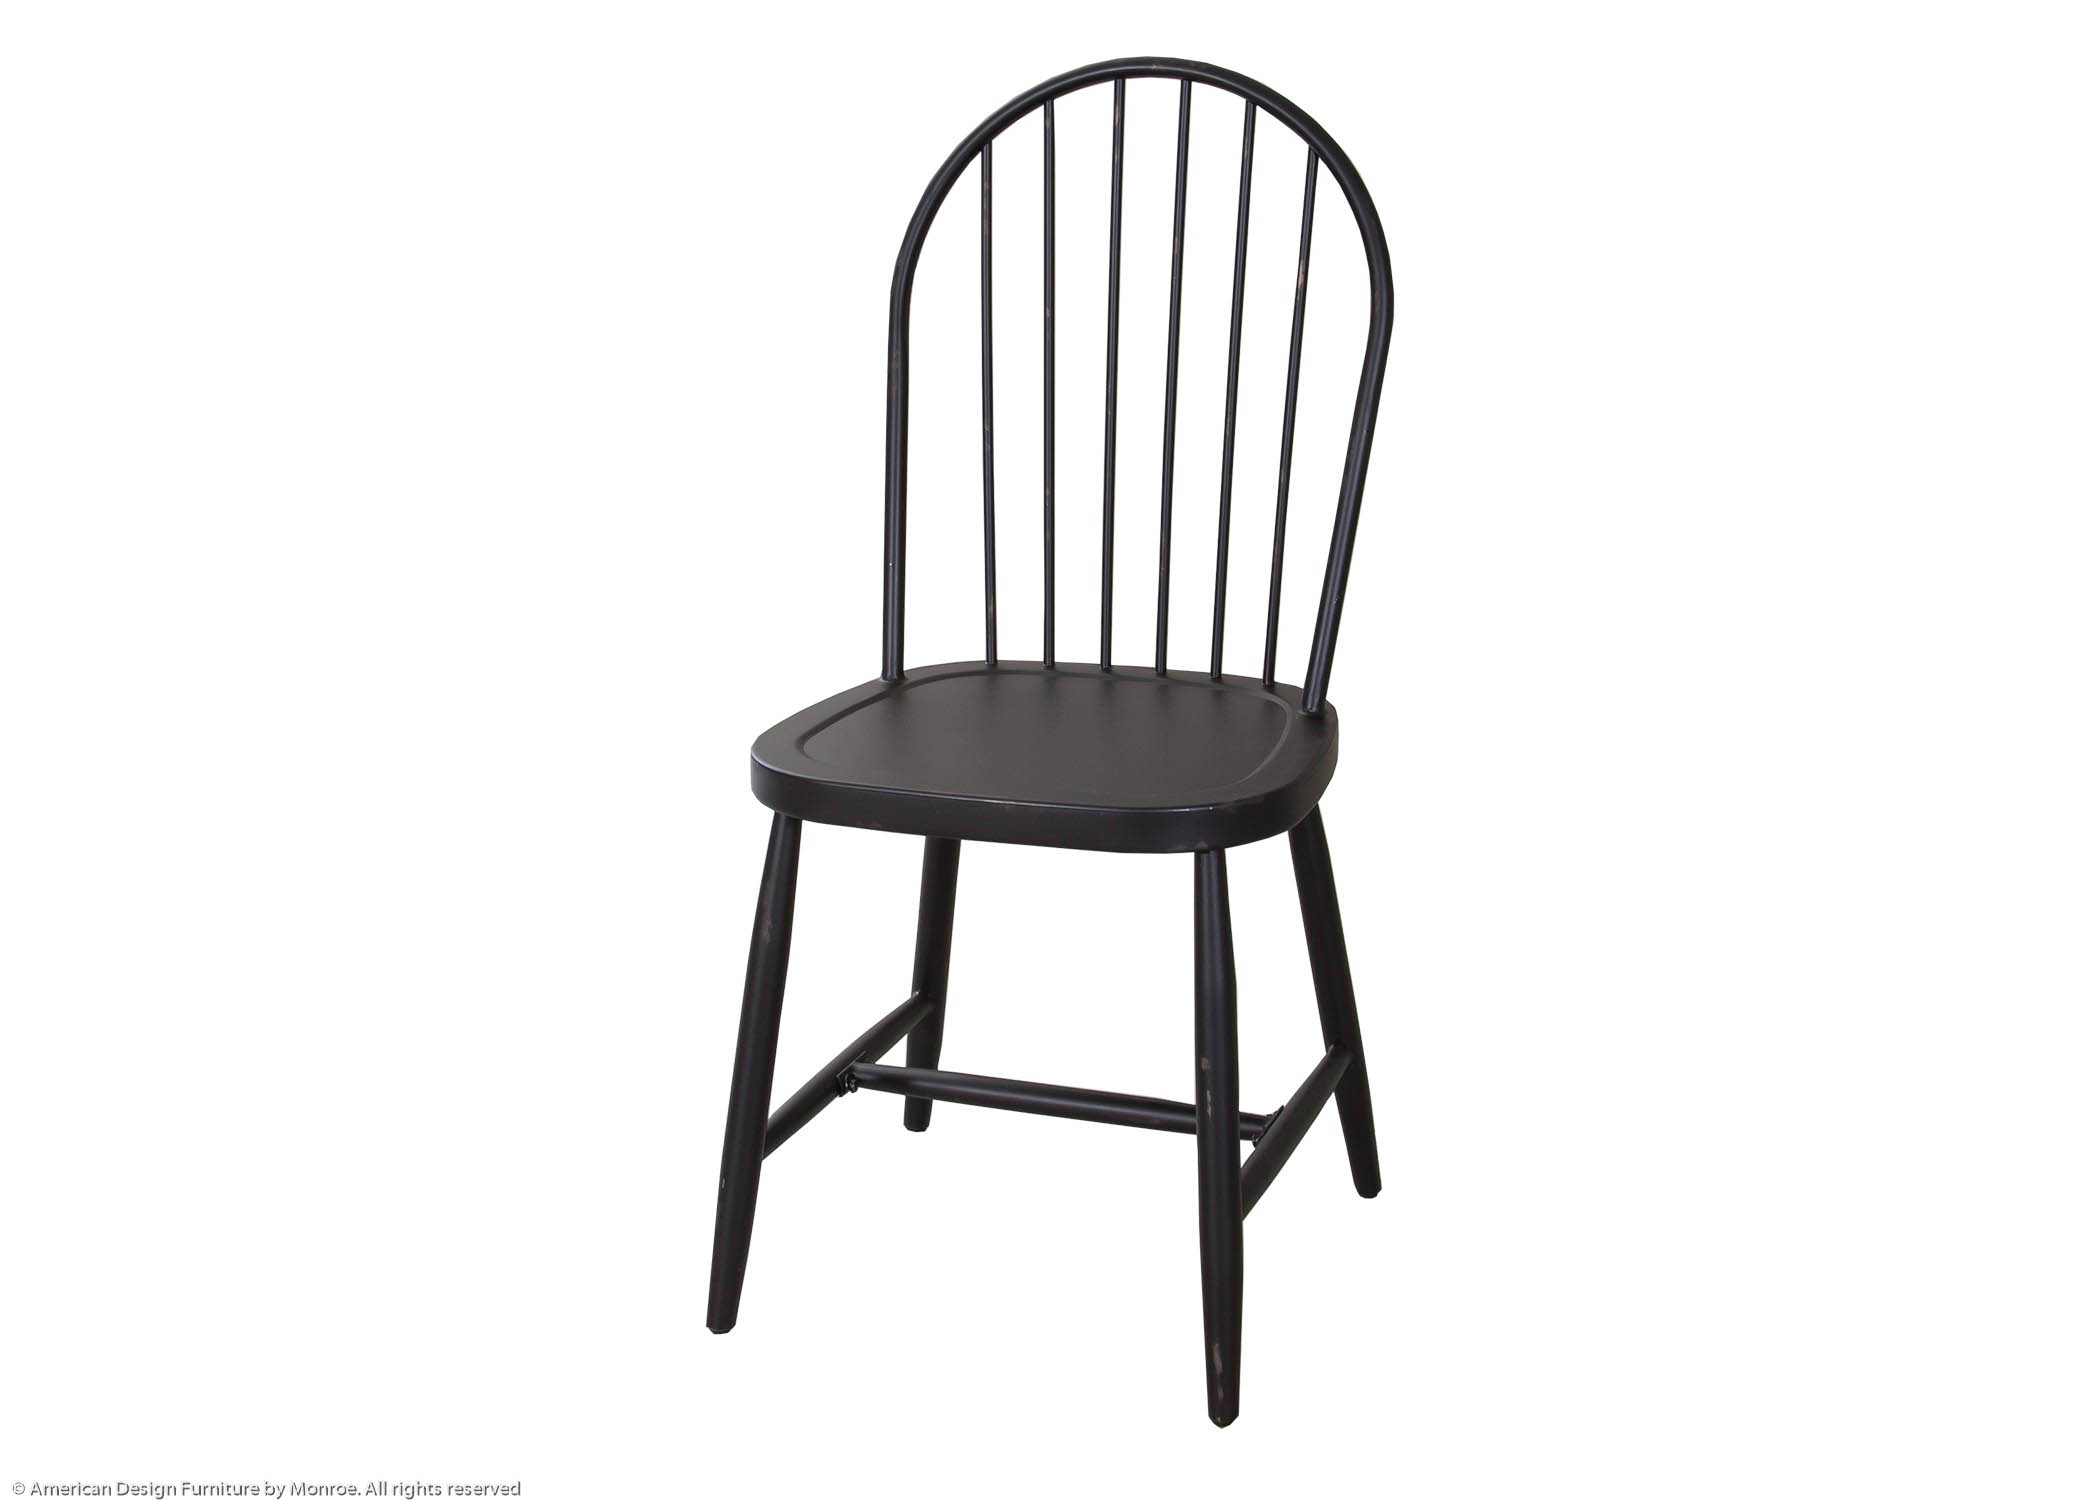 Reading Casual Side Chair Pic 1 (Heading Windsor Side Chair (Black)